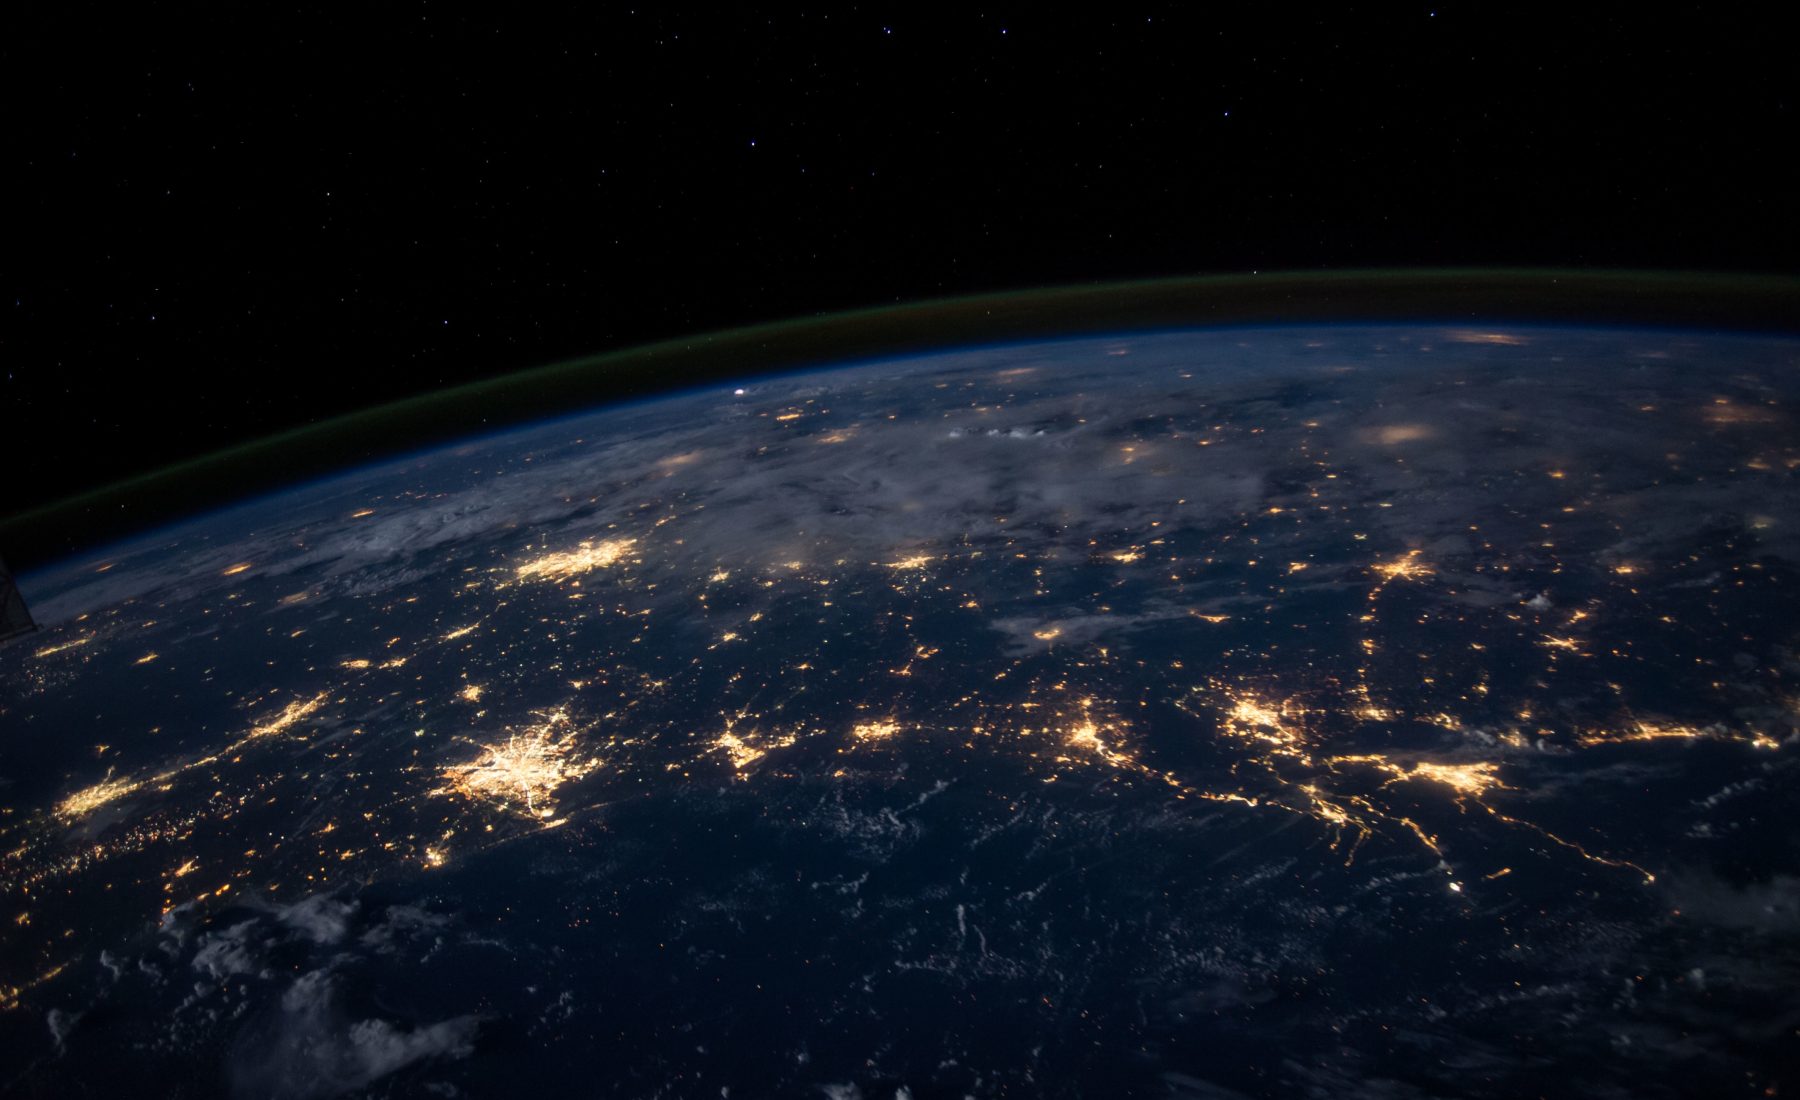 Network of lights on earth - view from space 